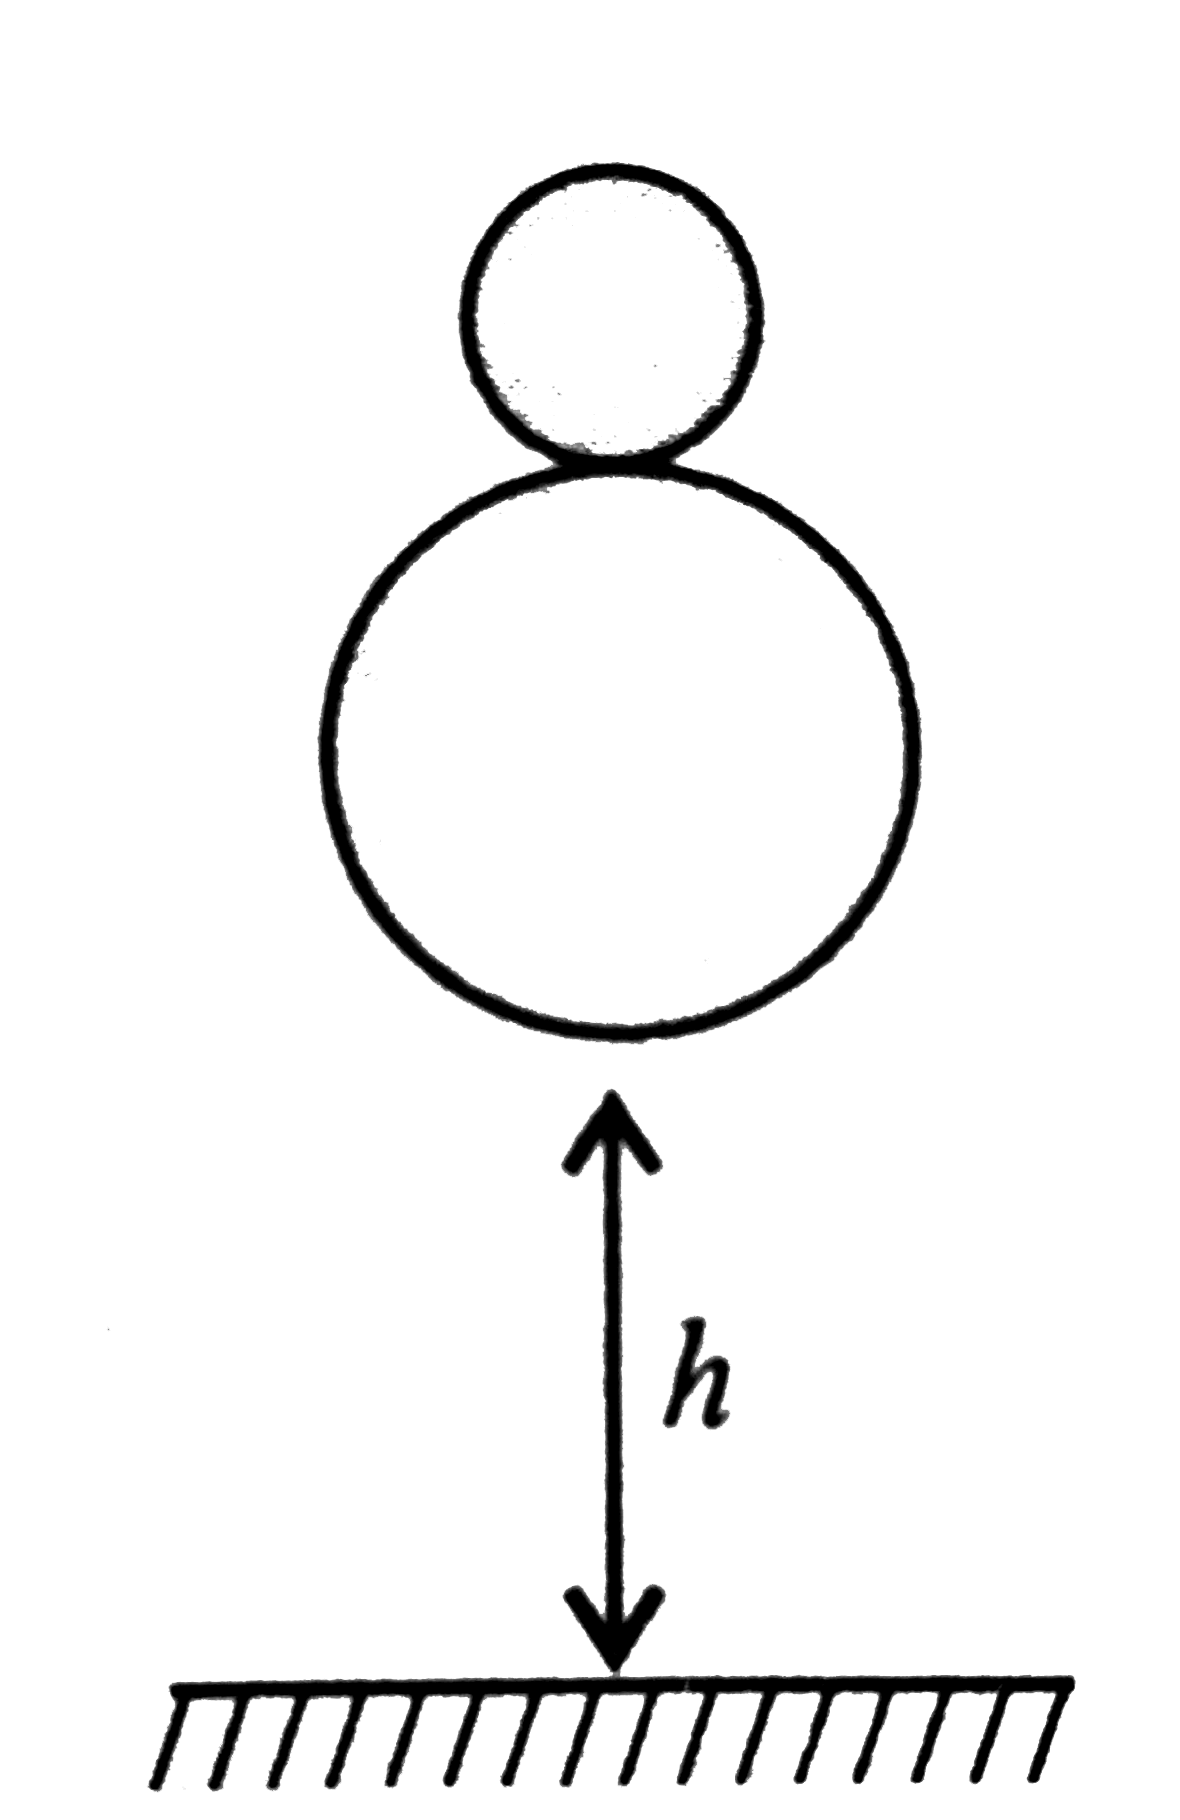 A tennis ball with (small) mass m(2) rests on the top of a basketball of mass m(1)which is at a height h above the ground, and the bottom of the tennis ball is at height h+ d above the ground. The balls are dropped. To what height does the tennis ball bounce with respect to ground? (Assume all collisions to be elastic and m(1)gt gt m(2))